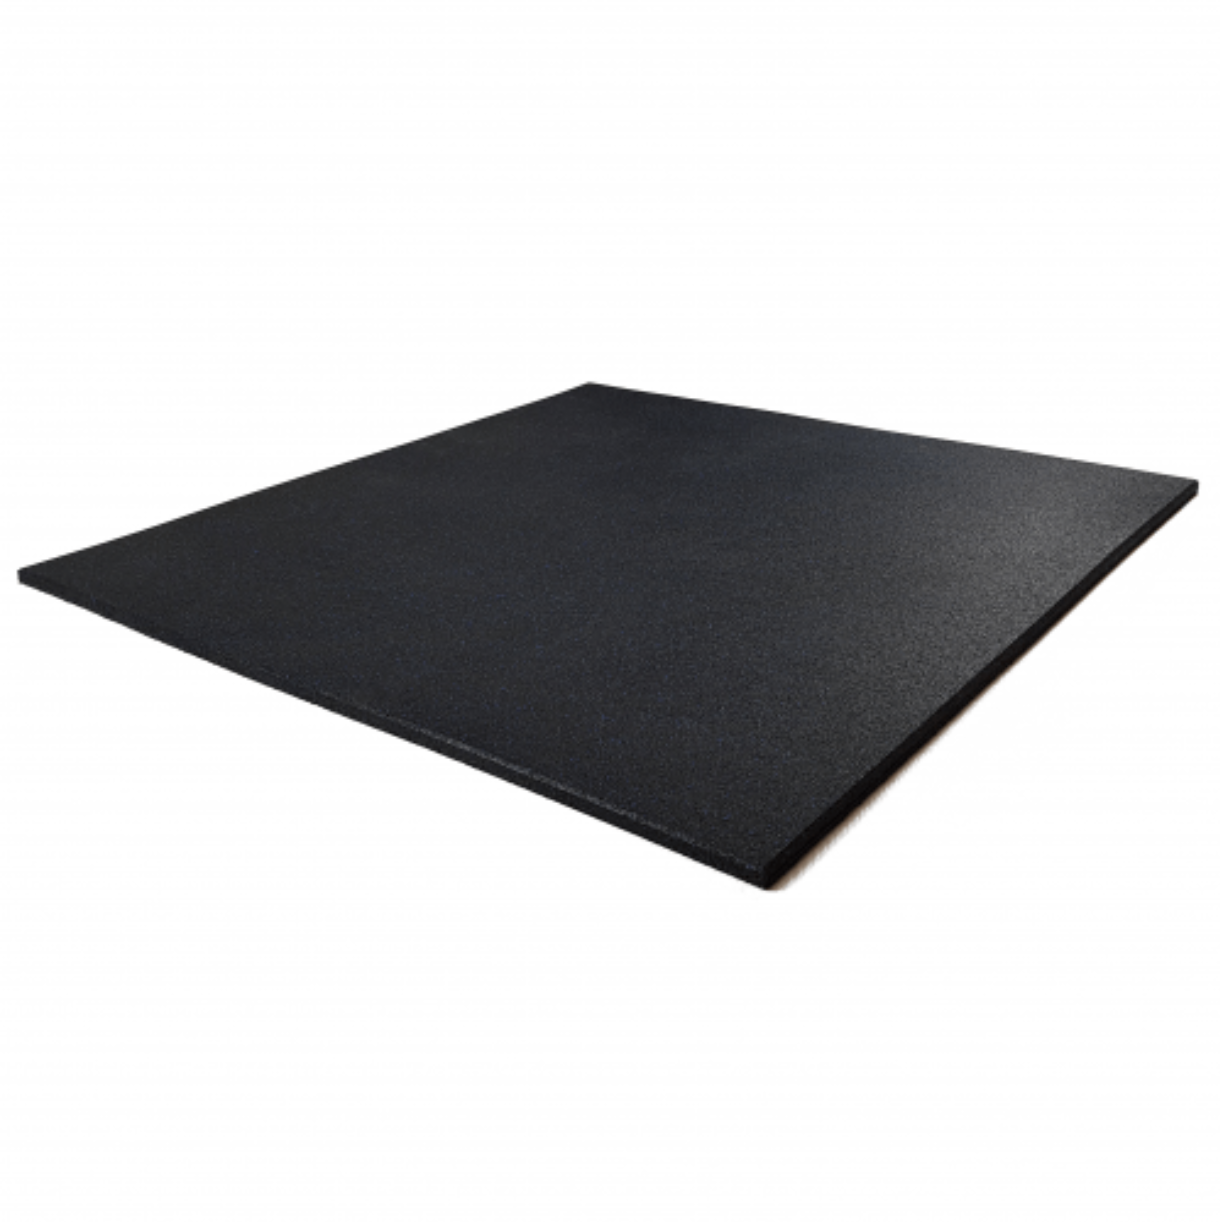 Primal Pro Series ECO Matting - 1m x 1m  (available in 15mm or 20mm)